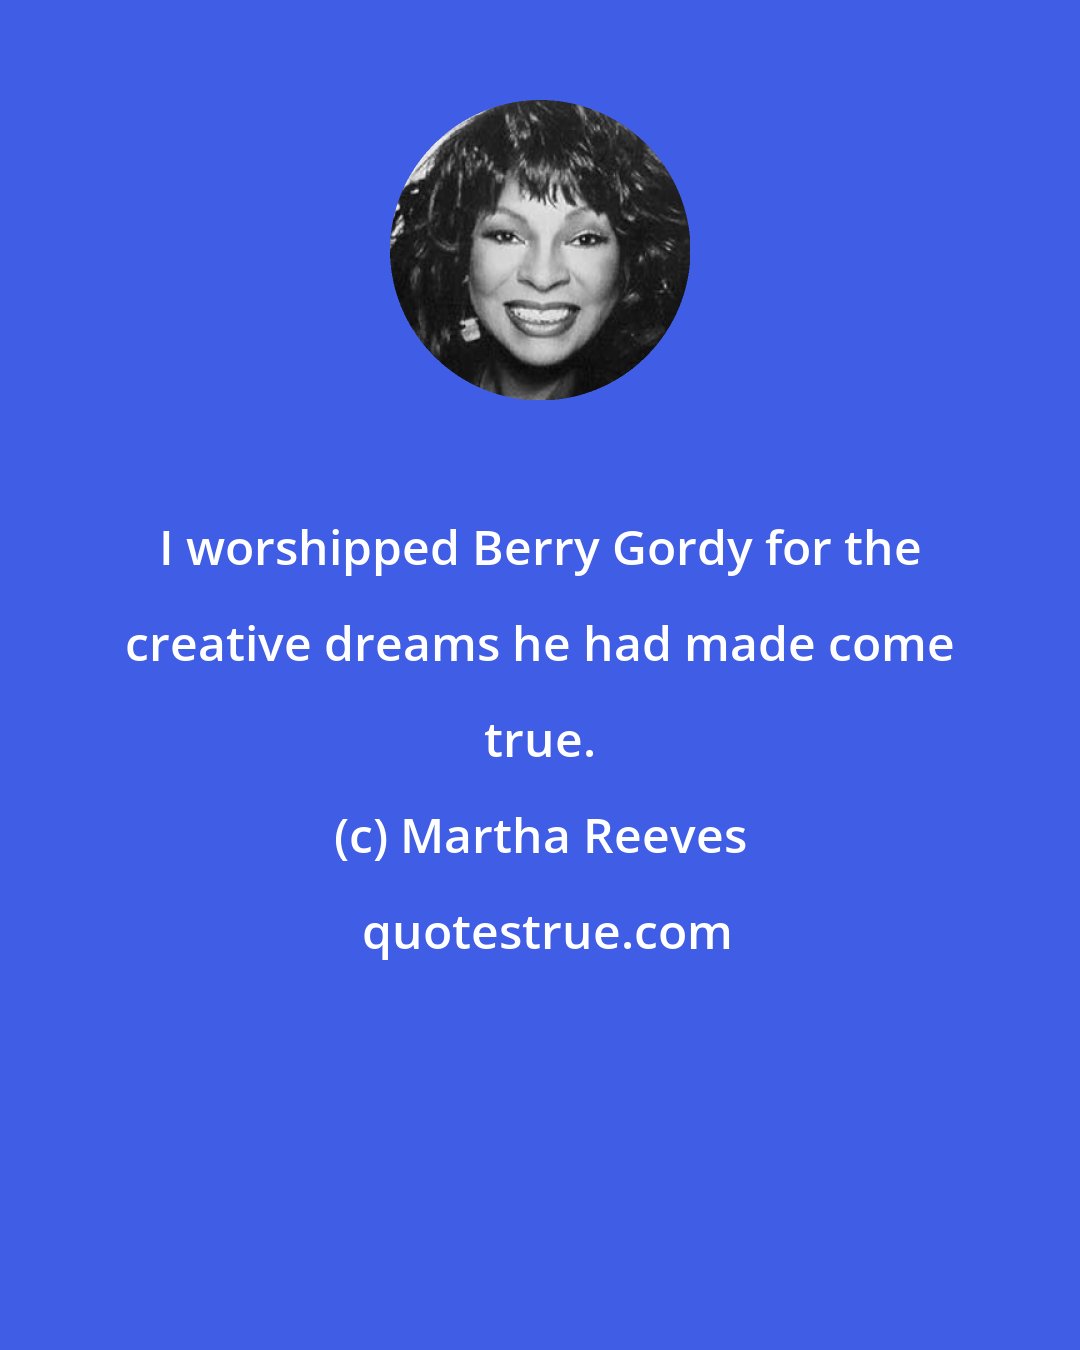 Martha Reeves: I worshipped Berry Gordy for the creative dreams he had made come true.